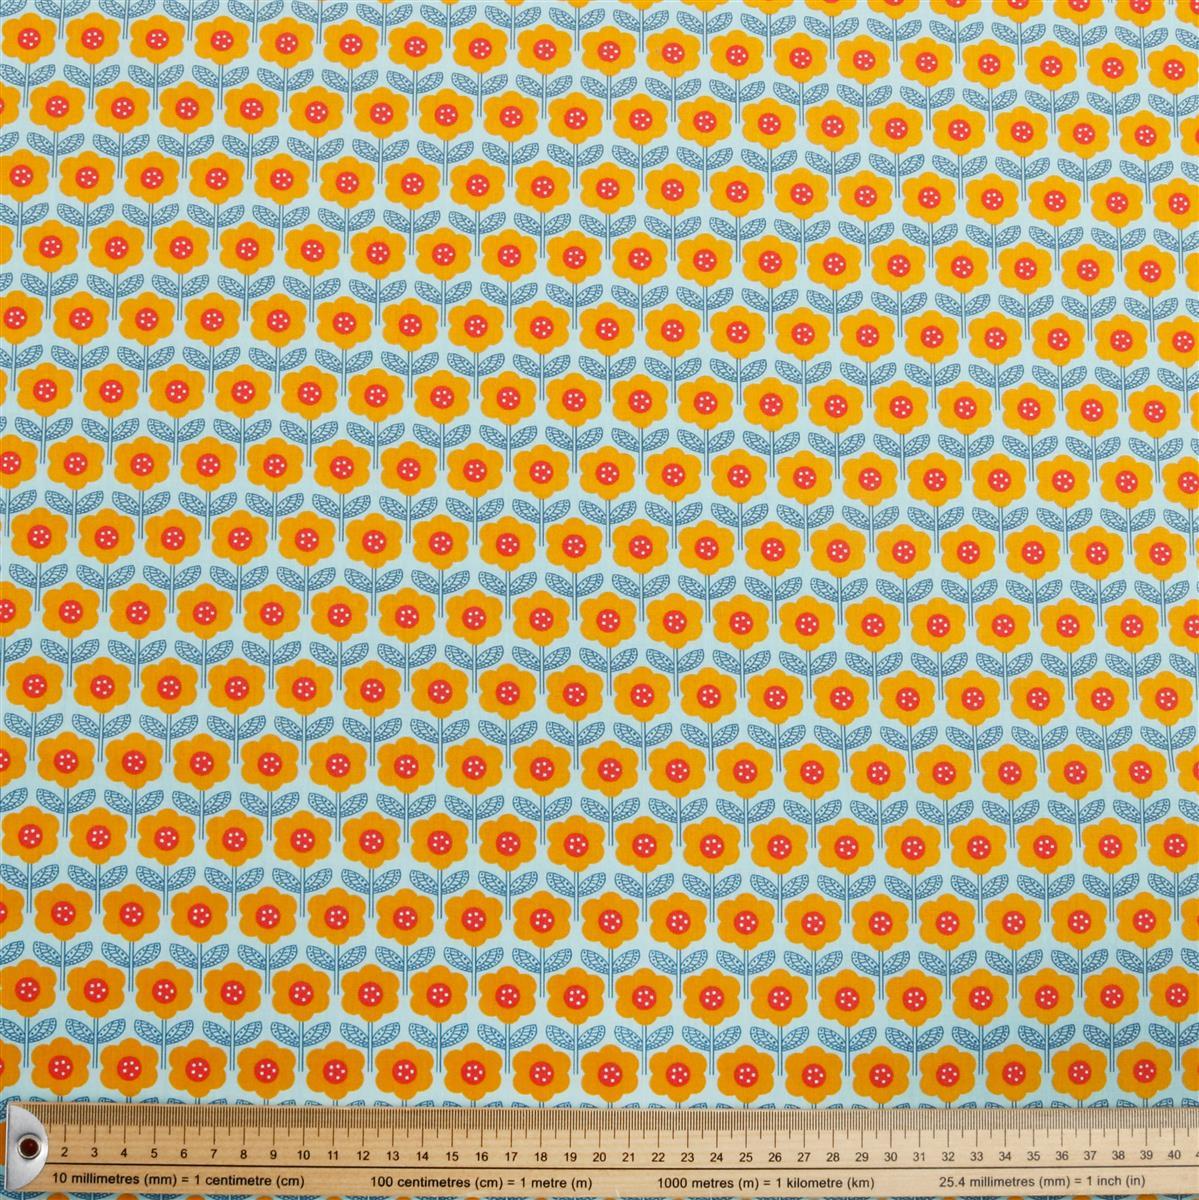 Blue Square with Yellow U Logo - Yellow Flowers Fabric on Blue Background. 0.5m. Was £3.99